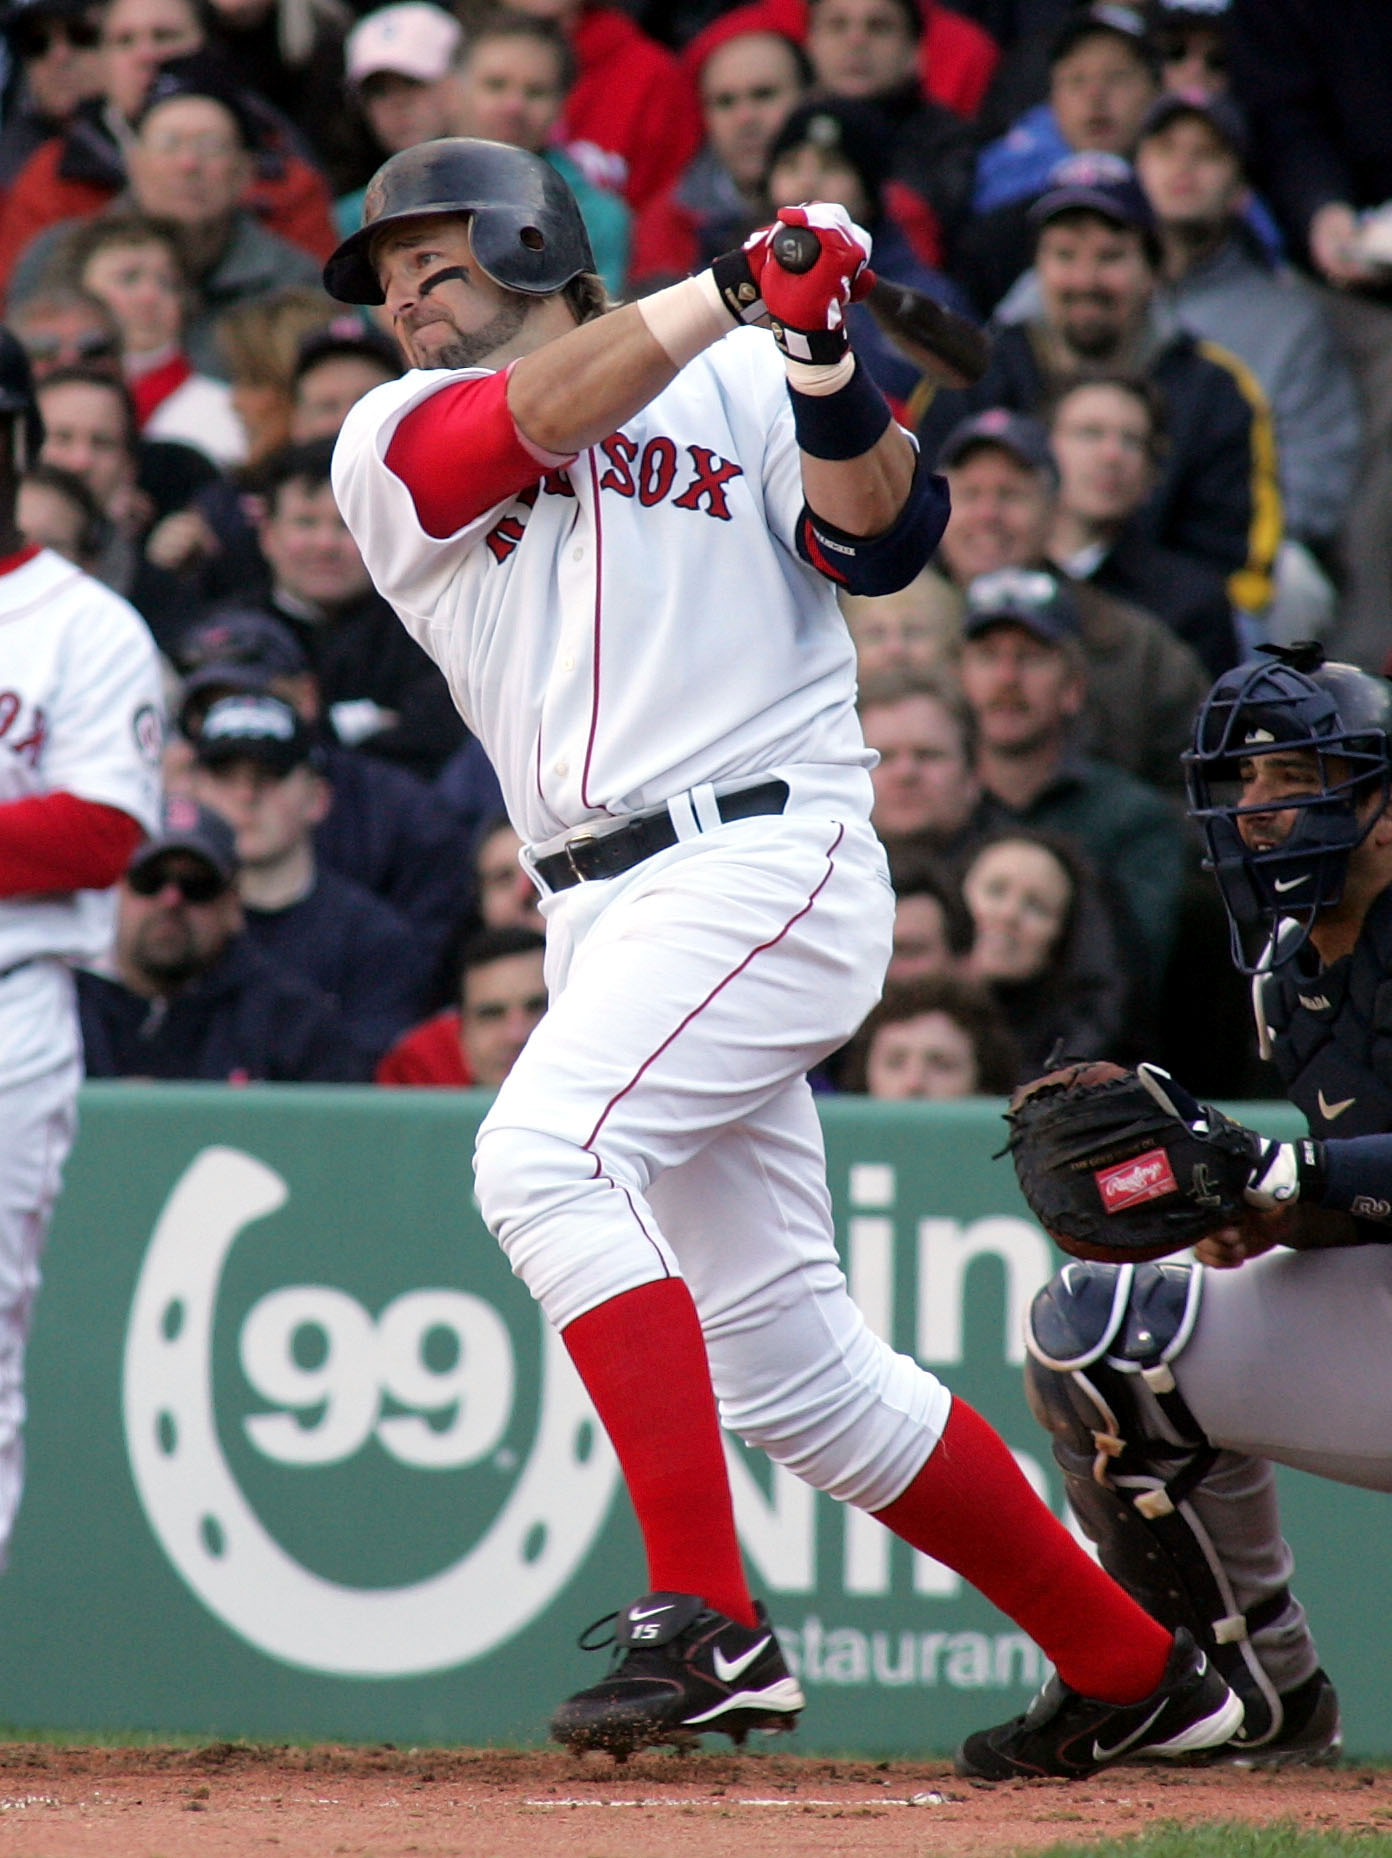 BOSTON - APRIL 11:  Kevin Millar #15 of the Boston Red Sox hits a two run base hit in the third inning against Mike Mussina of the New York Yankees scoring Trot Nixon and Manny Ramirez giving Boston a 4-0 lead during thier game at Fenway Park on April 11,